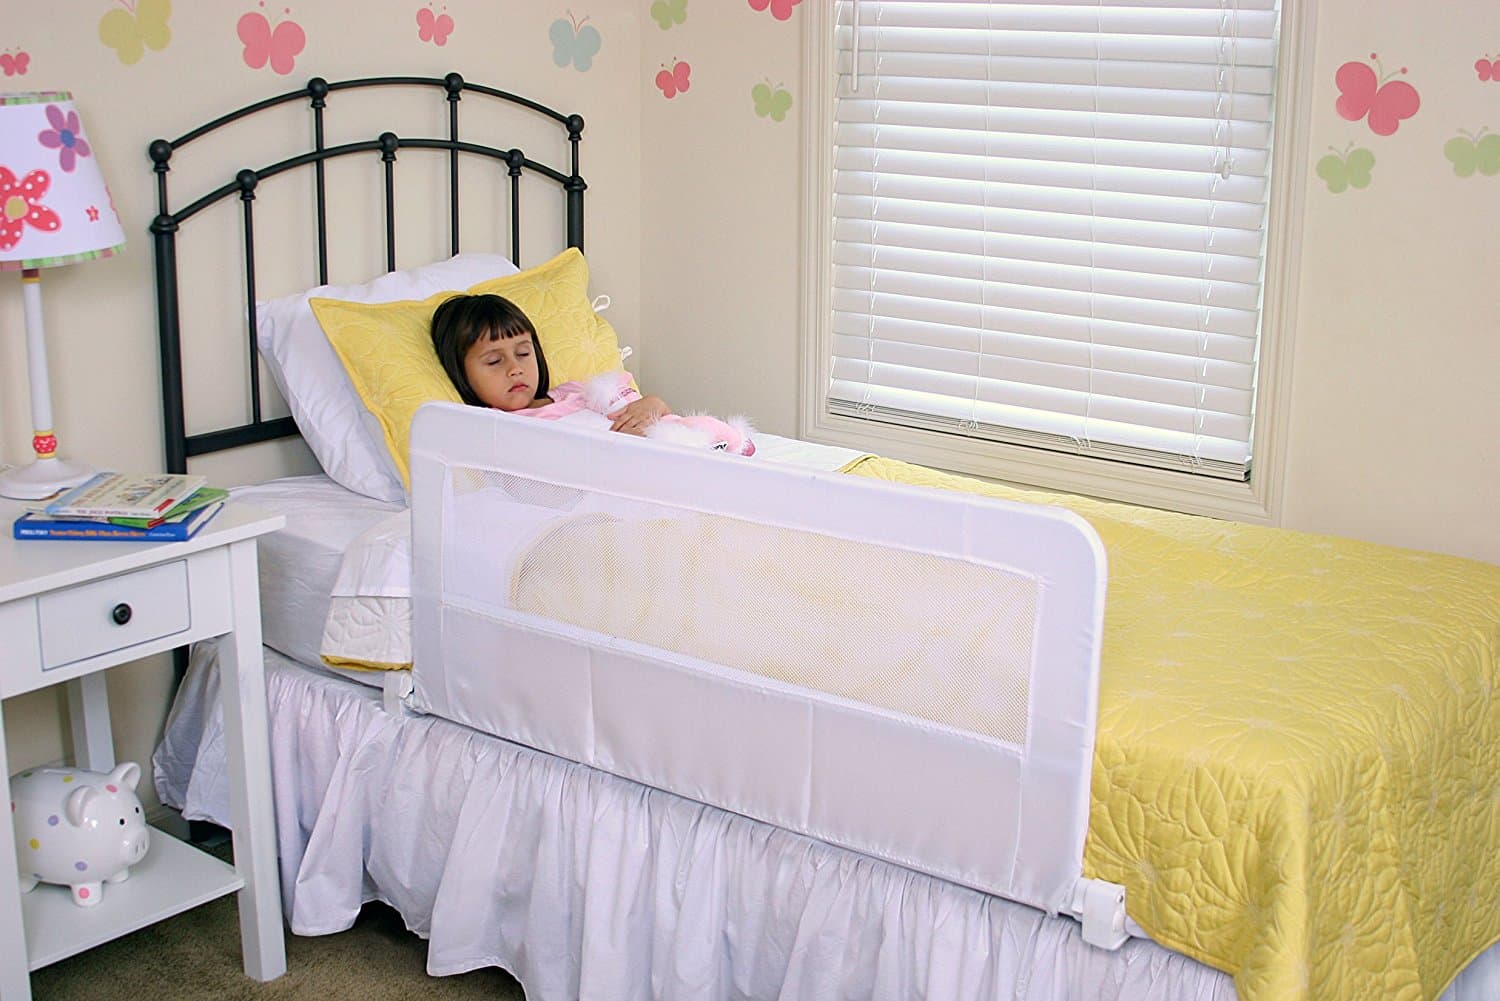 Top 10 Best Bed Rails for Kids in 2019 - Top Best Product ...